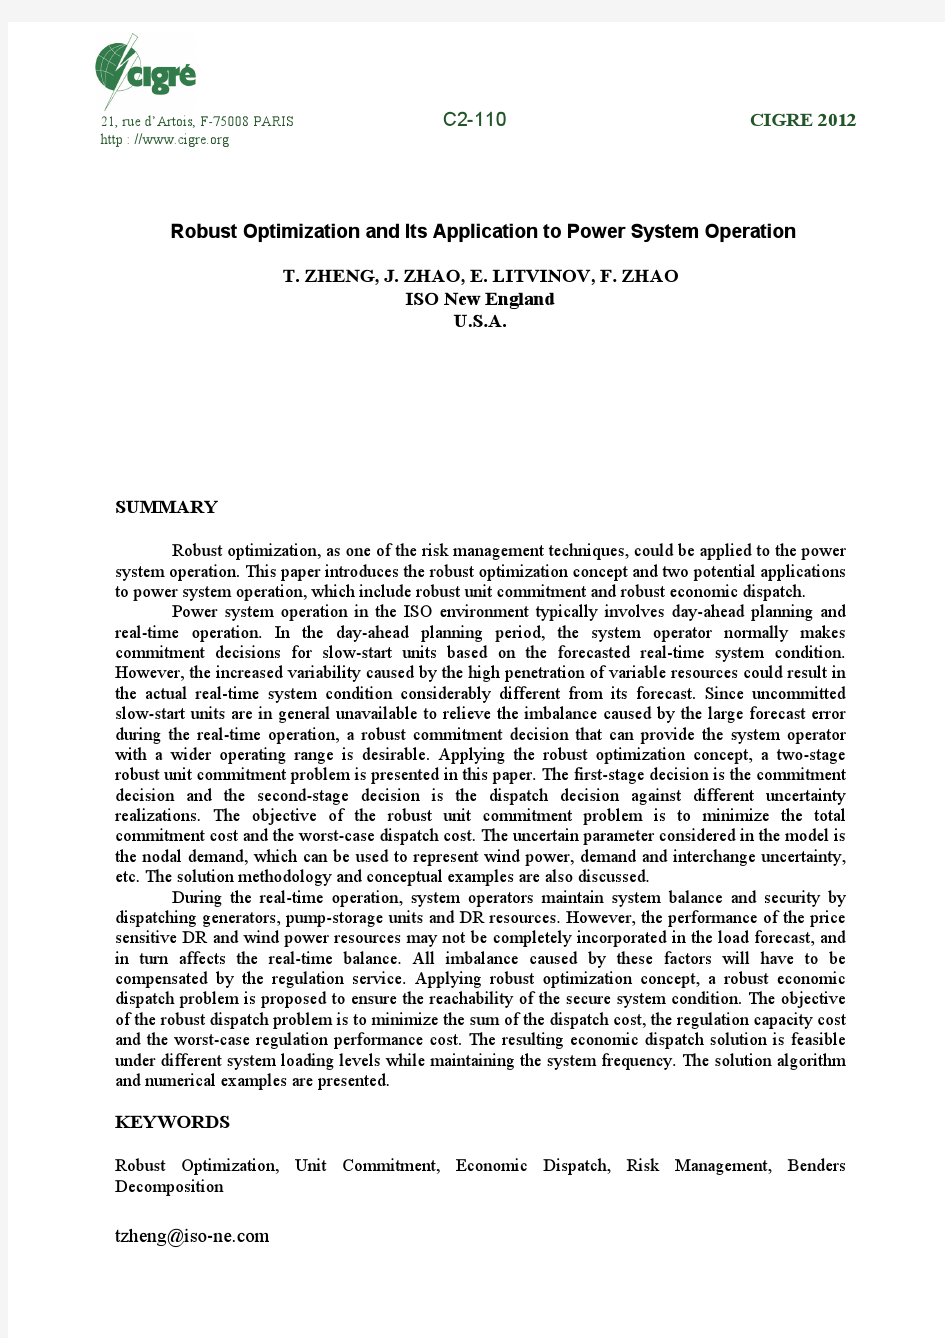 Robust Optimization and Its Application to Power System Operation